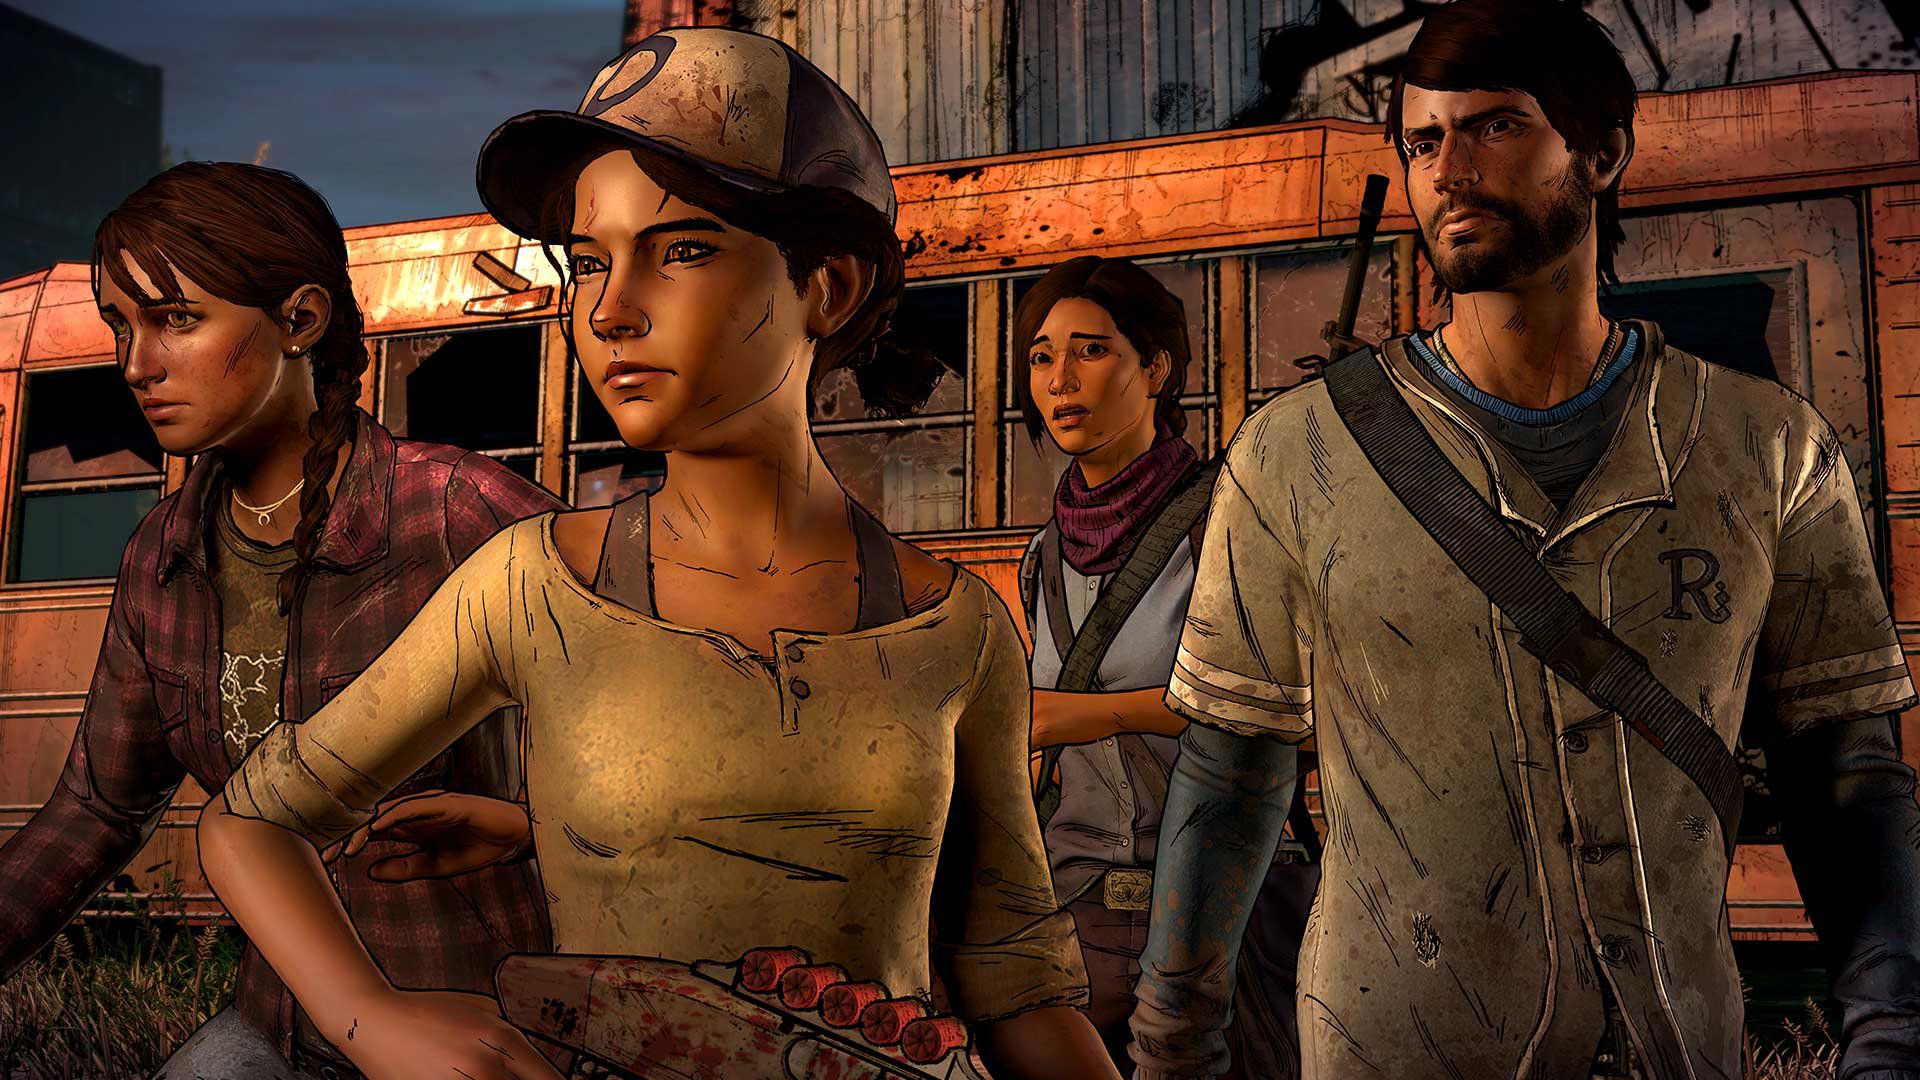 The Walking Dead 5 Reasons The Telltale Games Are Better Than The TV Show ( & 5 Why The Show Is Best)